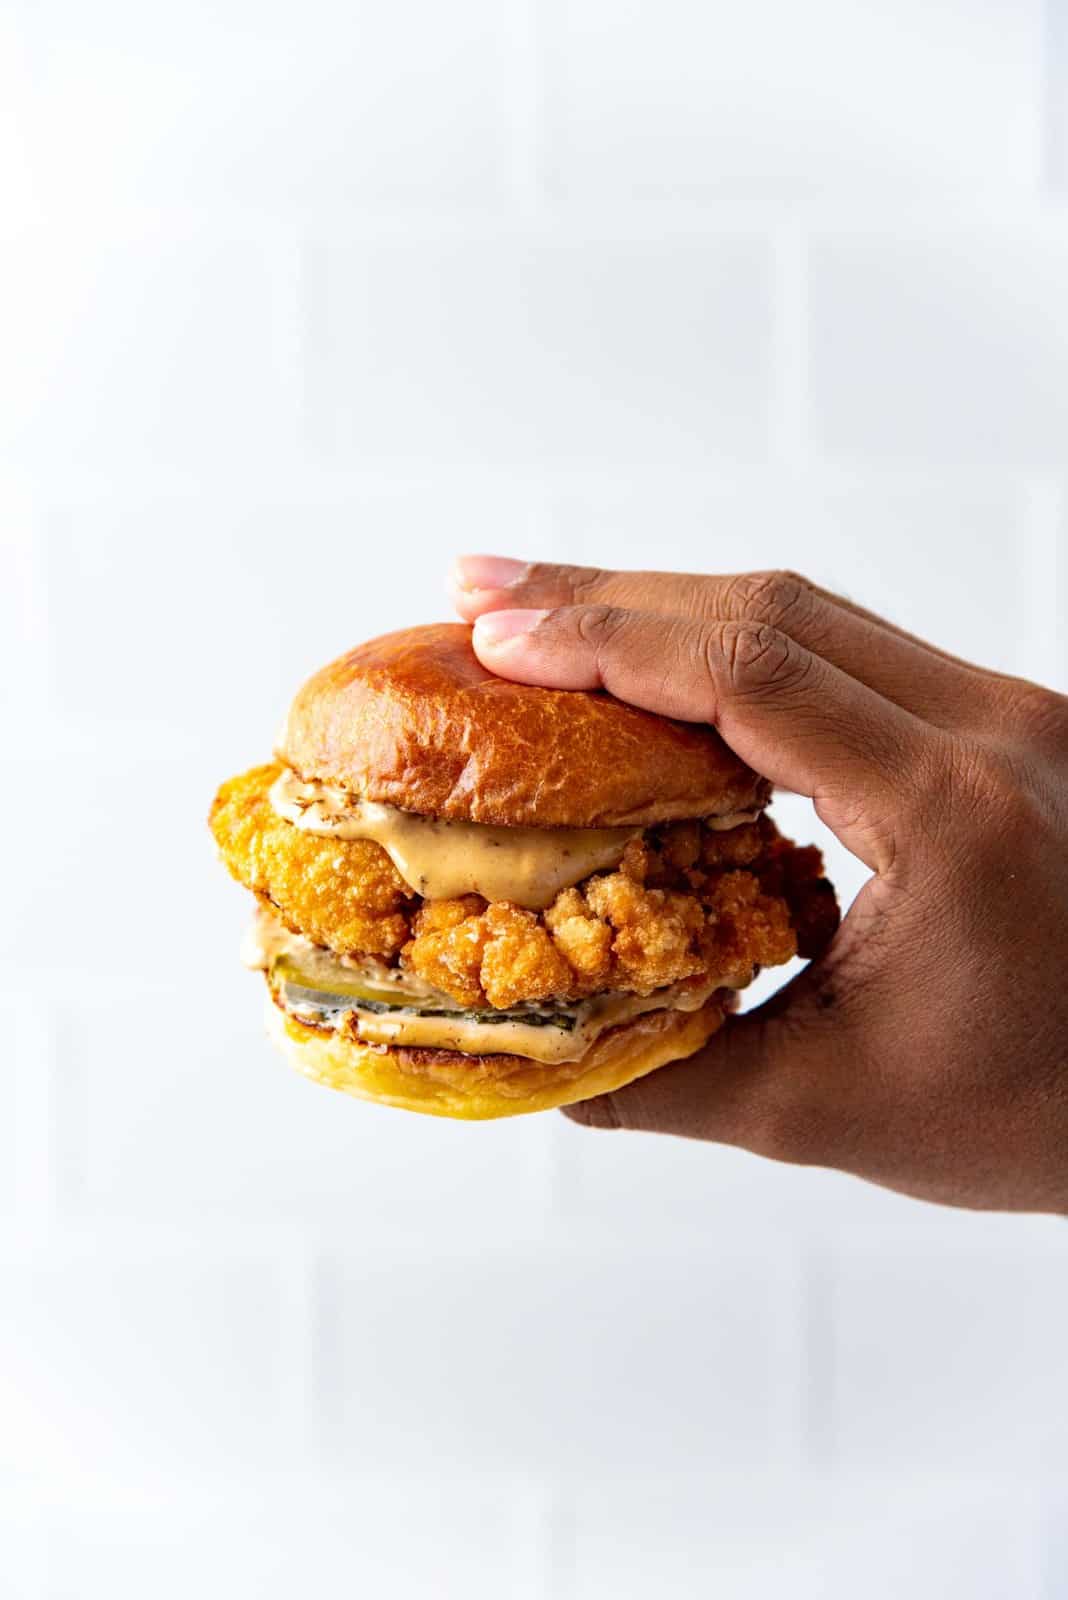 The chicken sandwich being held by a hand against a white background